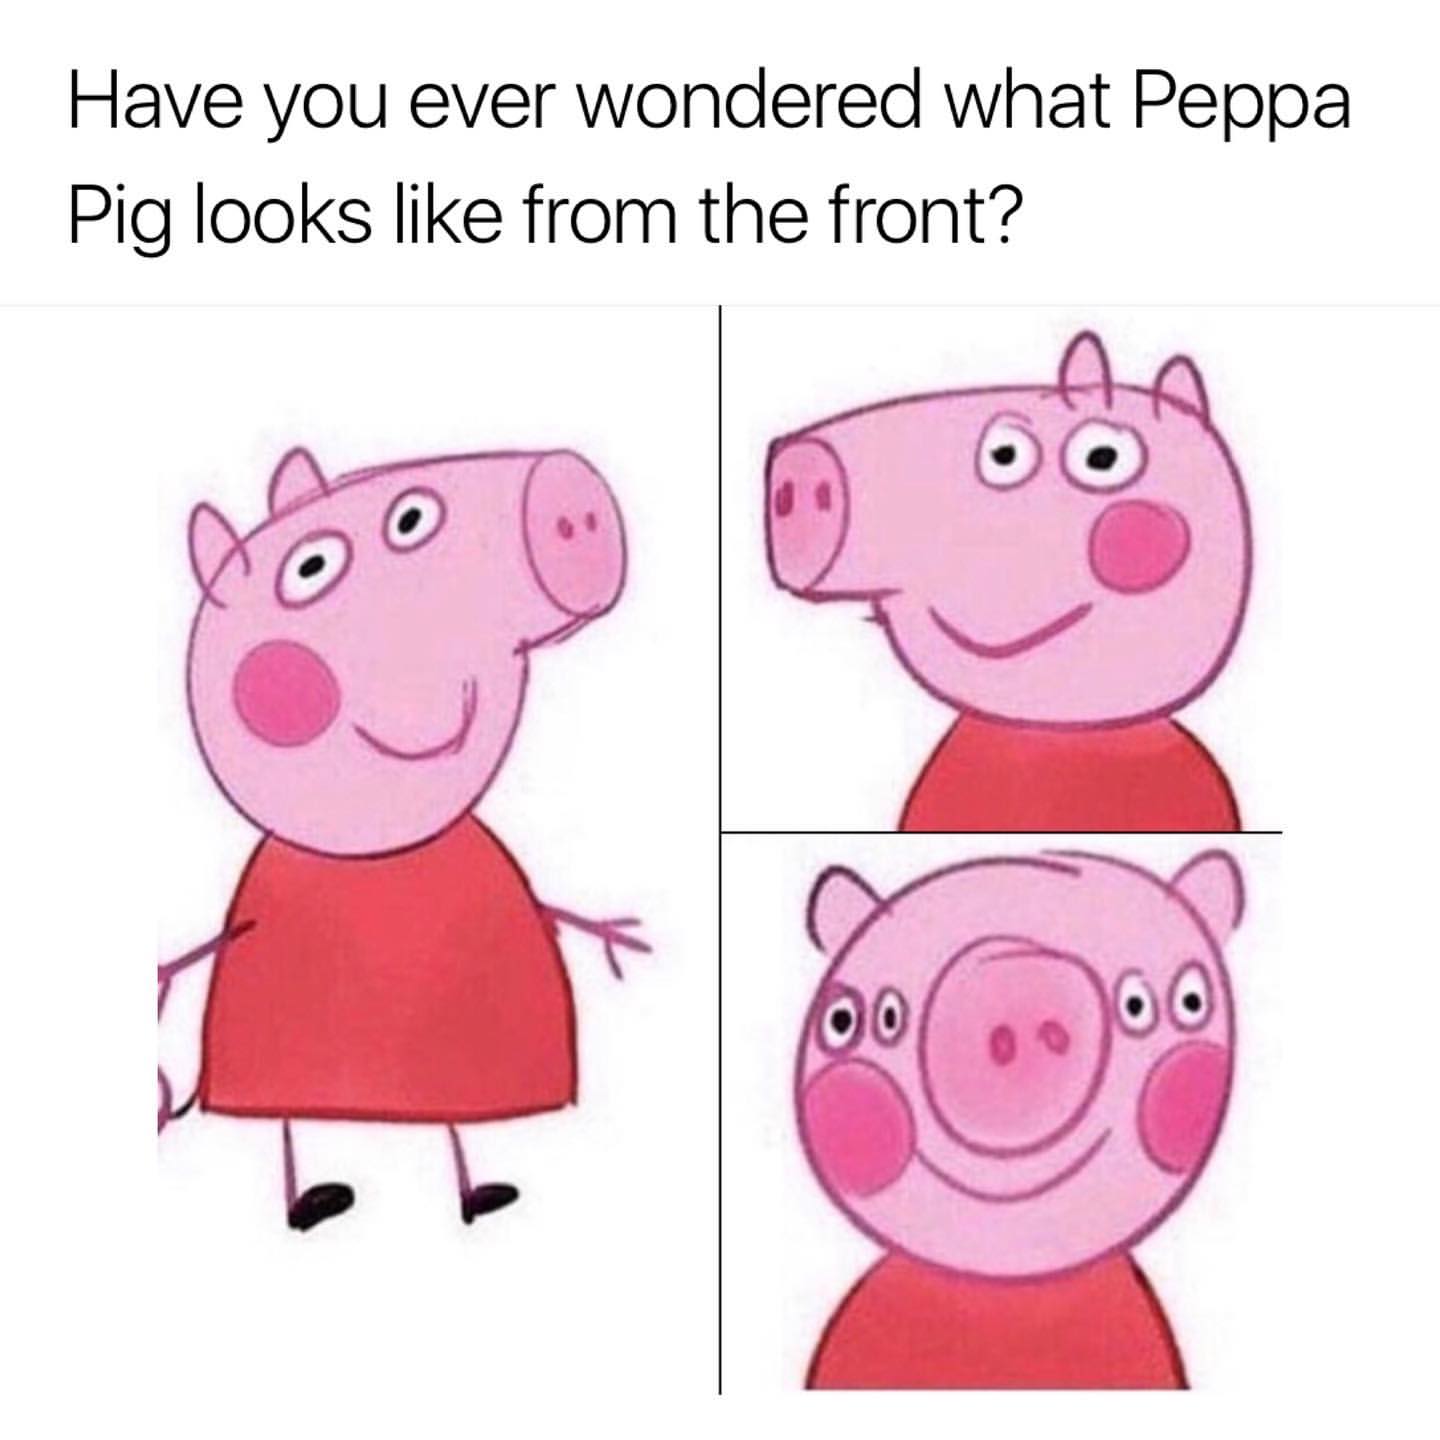 Have you ever wondered what Peppa Pig looks like from the front?